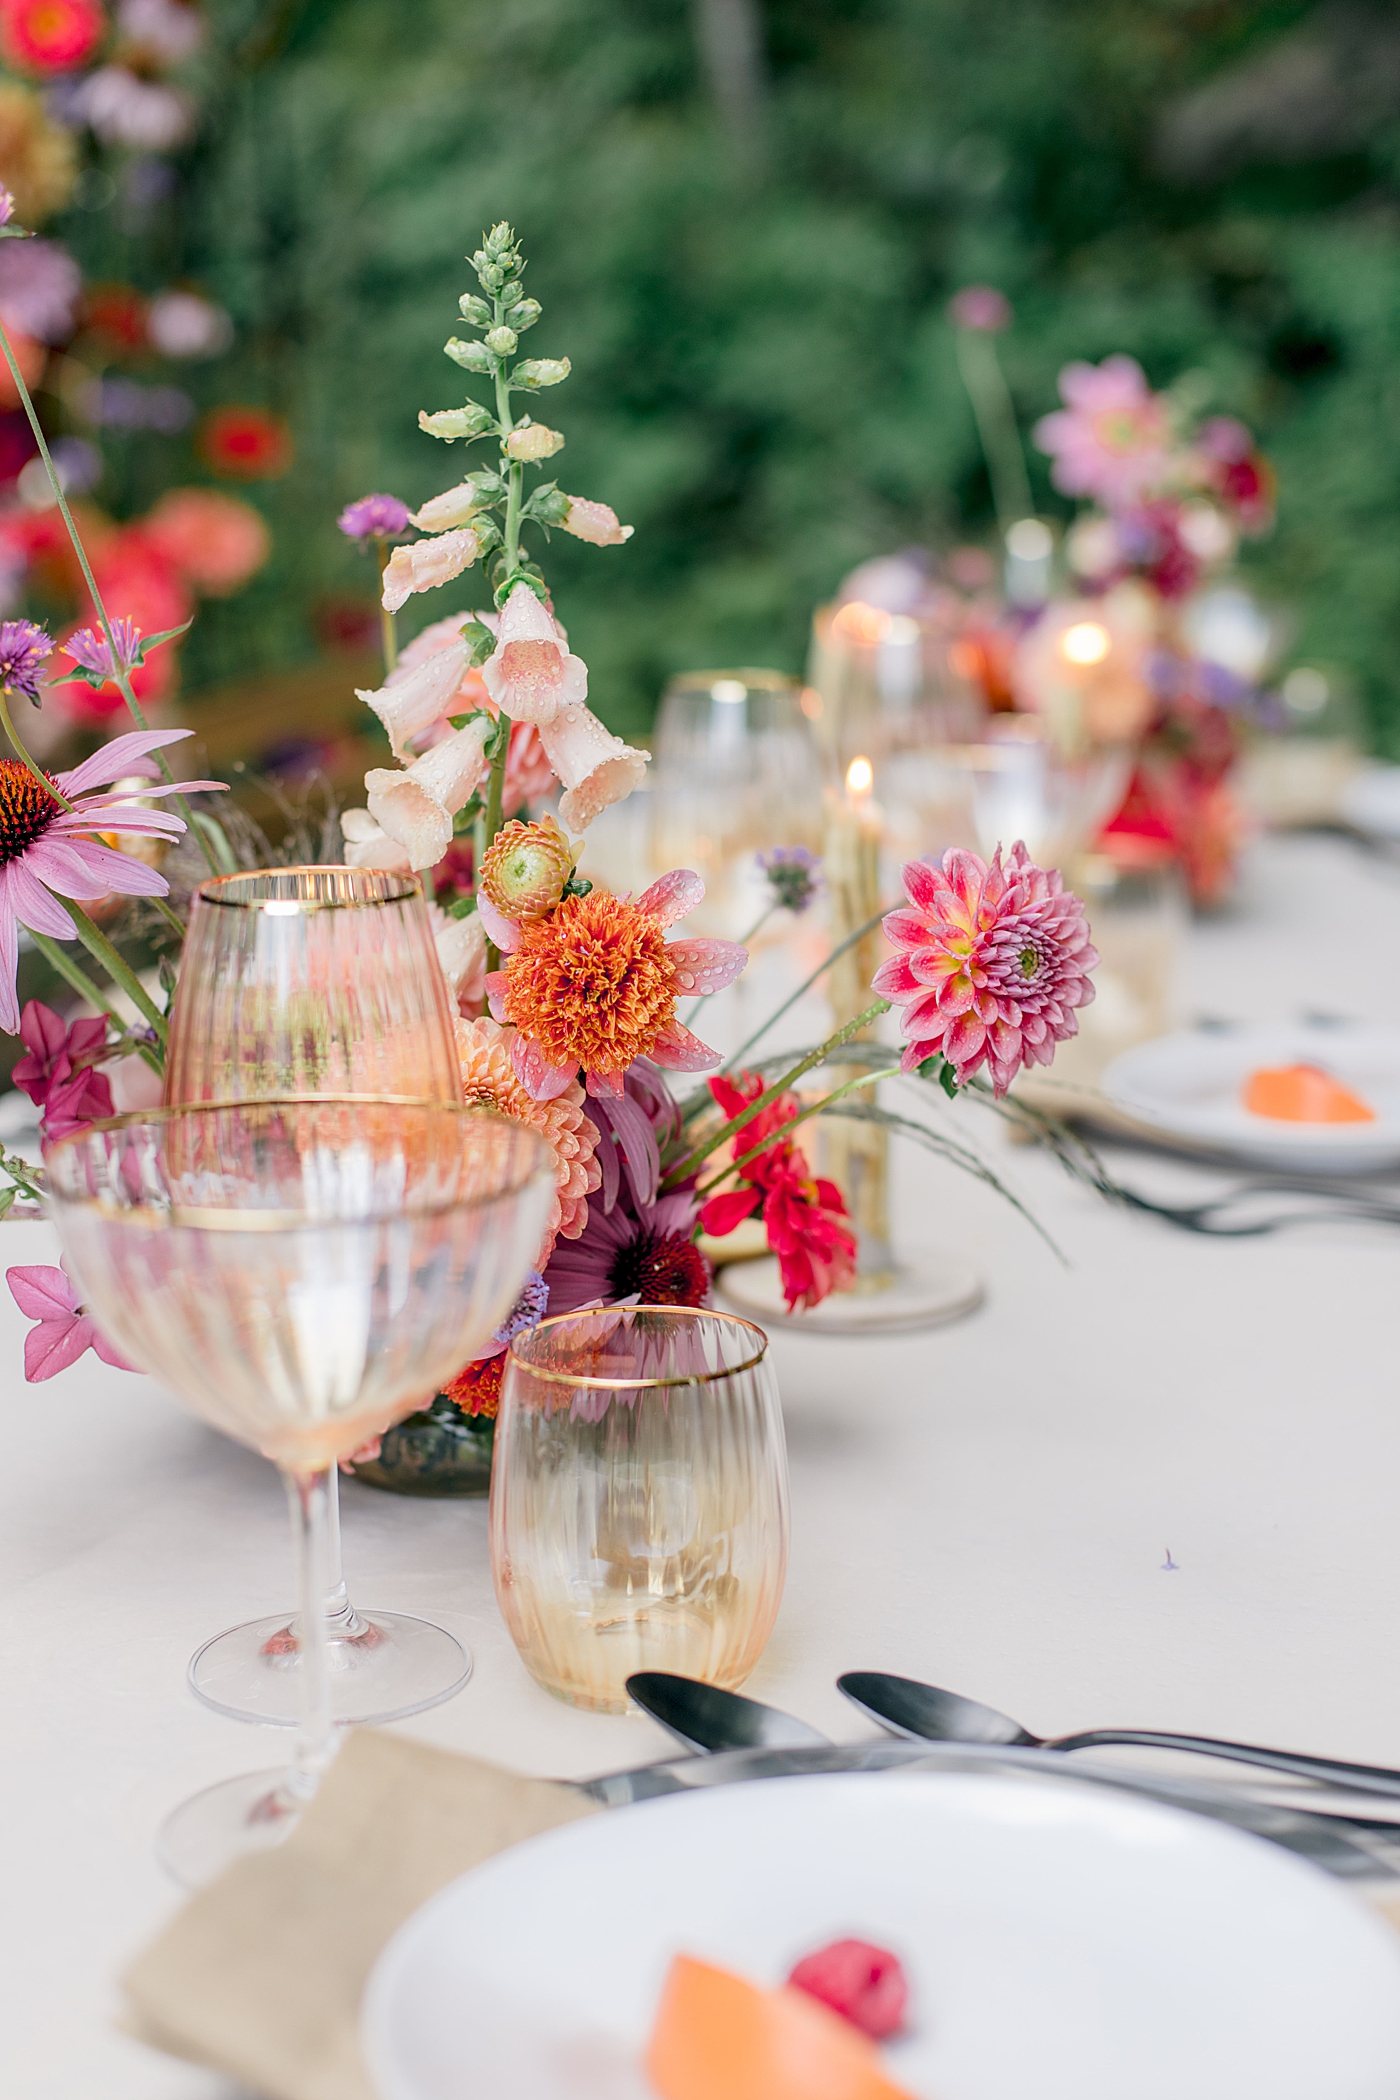 Detail of colorful flowers with wine glasses | Image by Hope Helmuth Photography